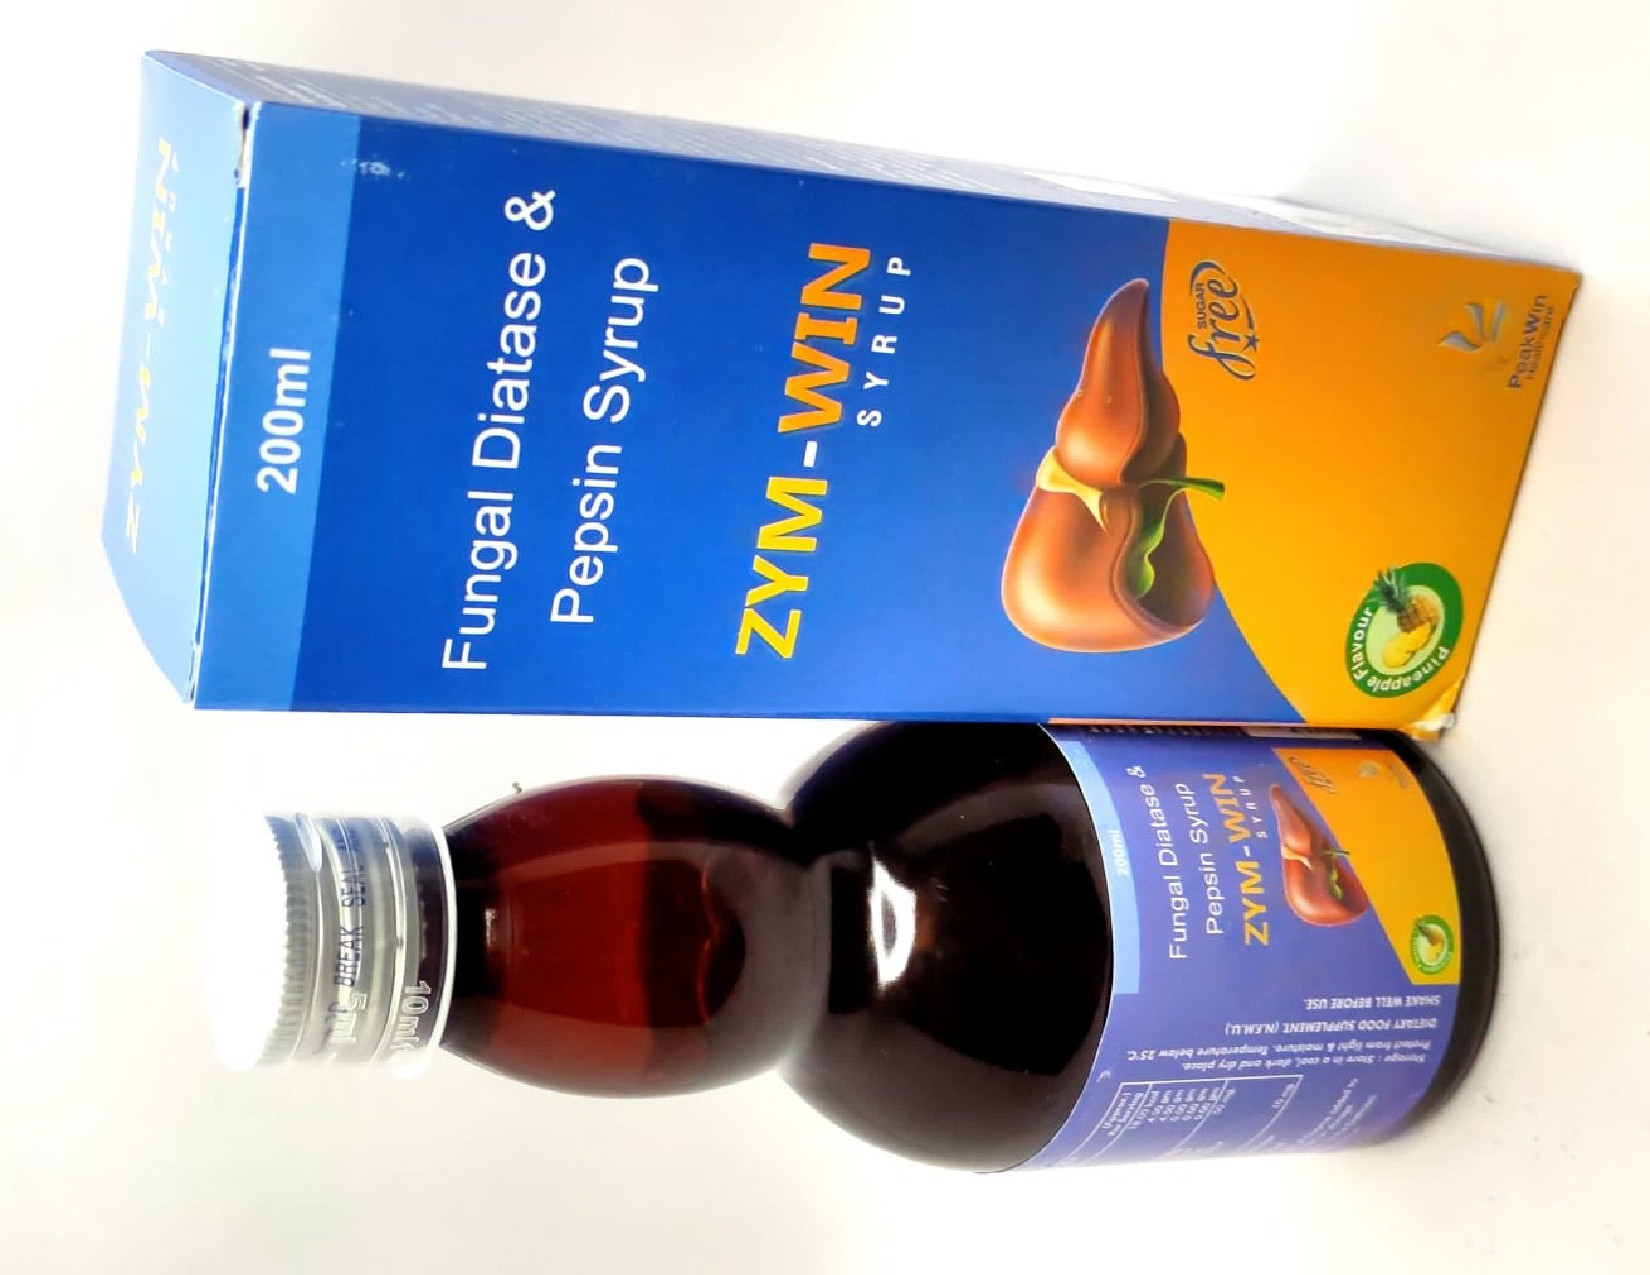 Product Name: Zym Win, Compositions of Zym Win are Fungal Diastase & Pepsin Syrup - Peakwin Healthcare